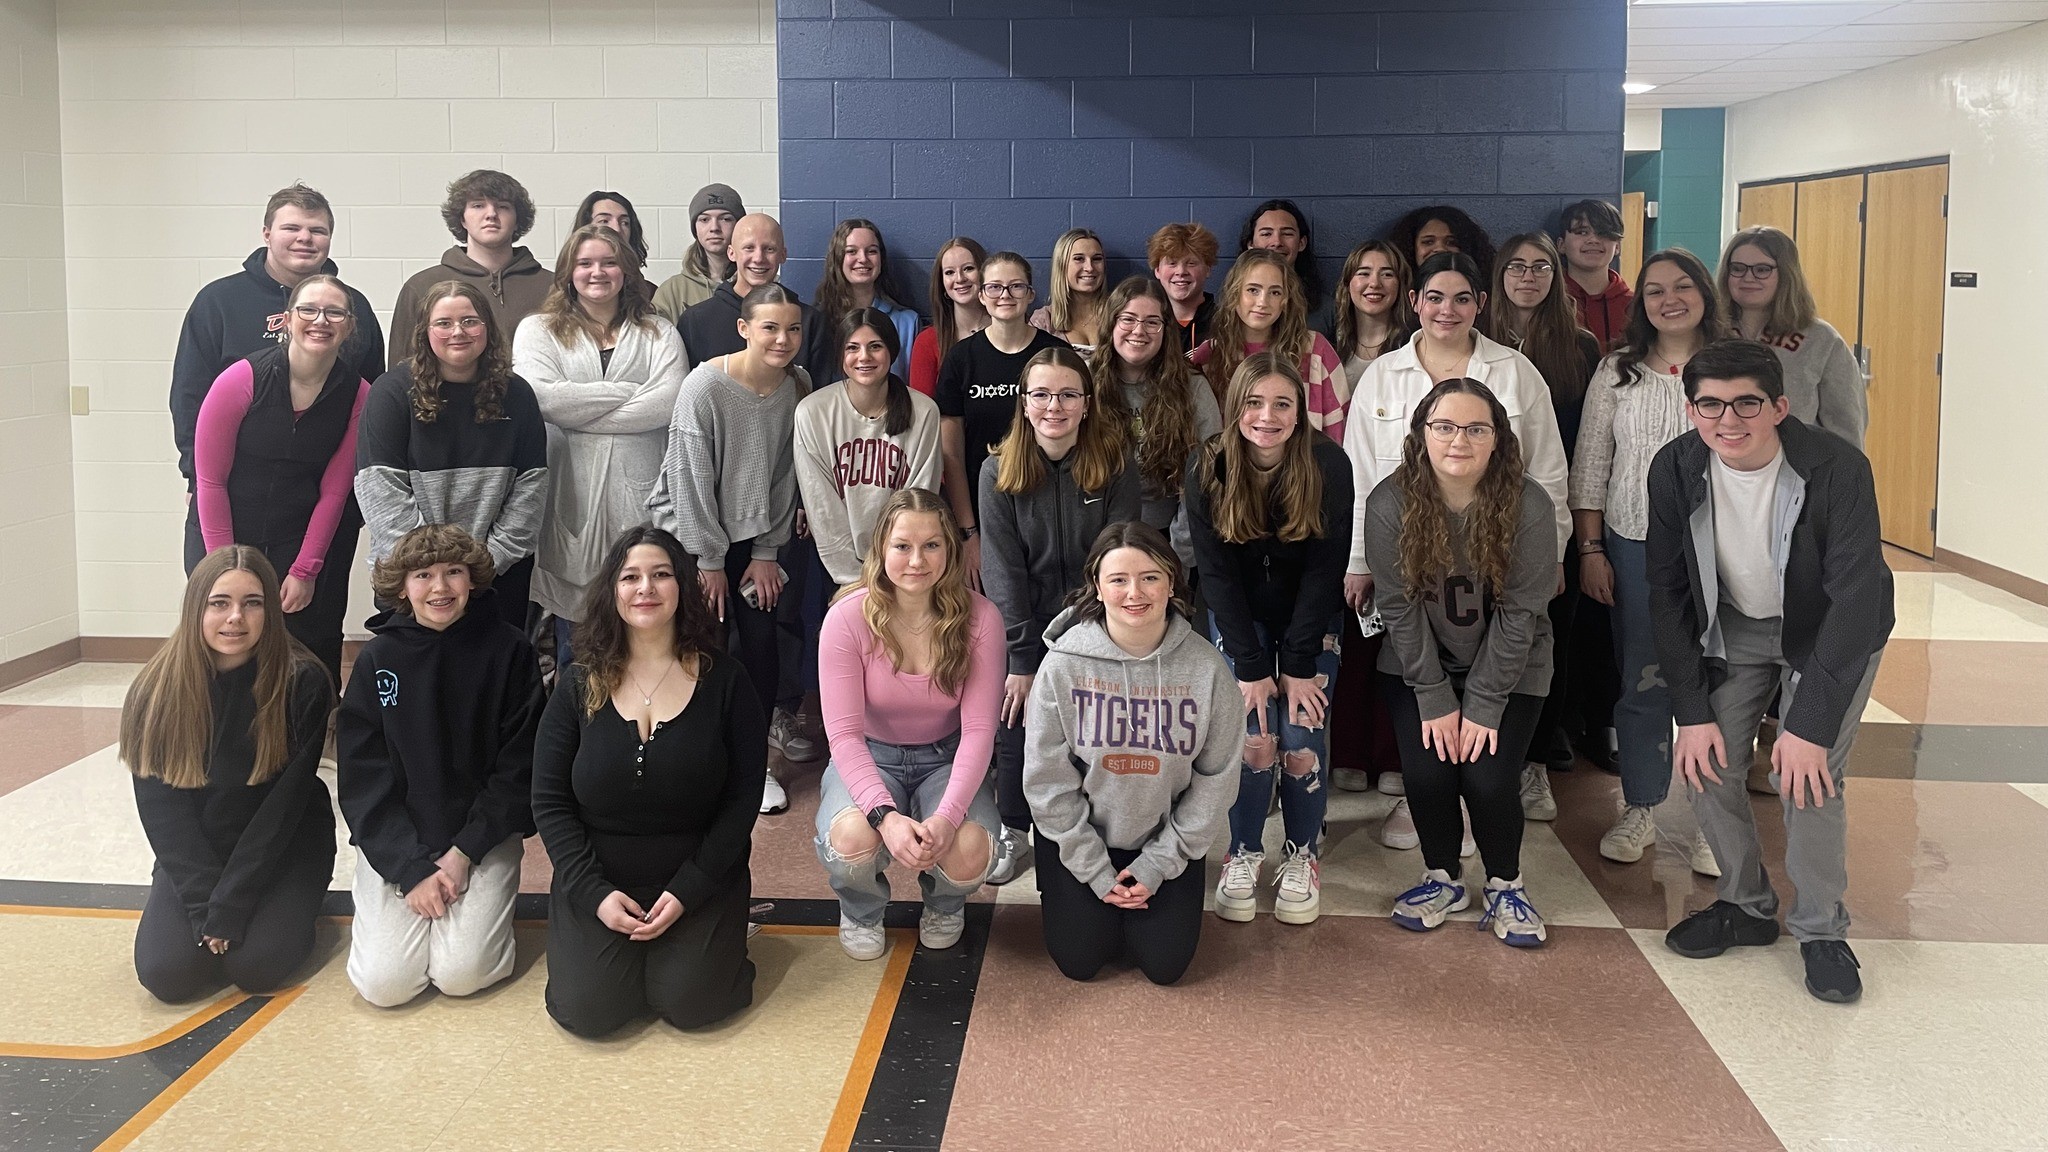 Kaukauna High School choir instructor Joy Paffenroth and a group of choir students have been invited to be part of a performance at Carnegie Hall in New York City.